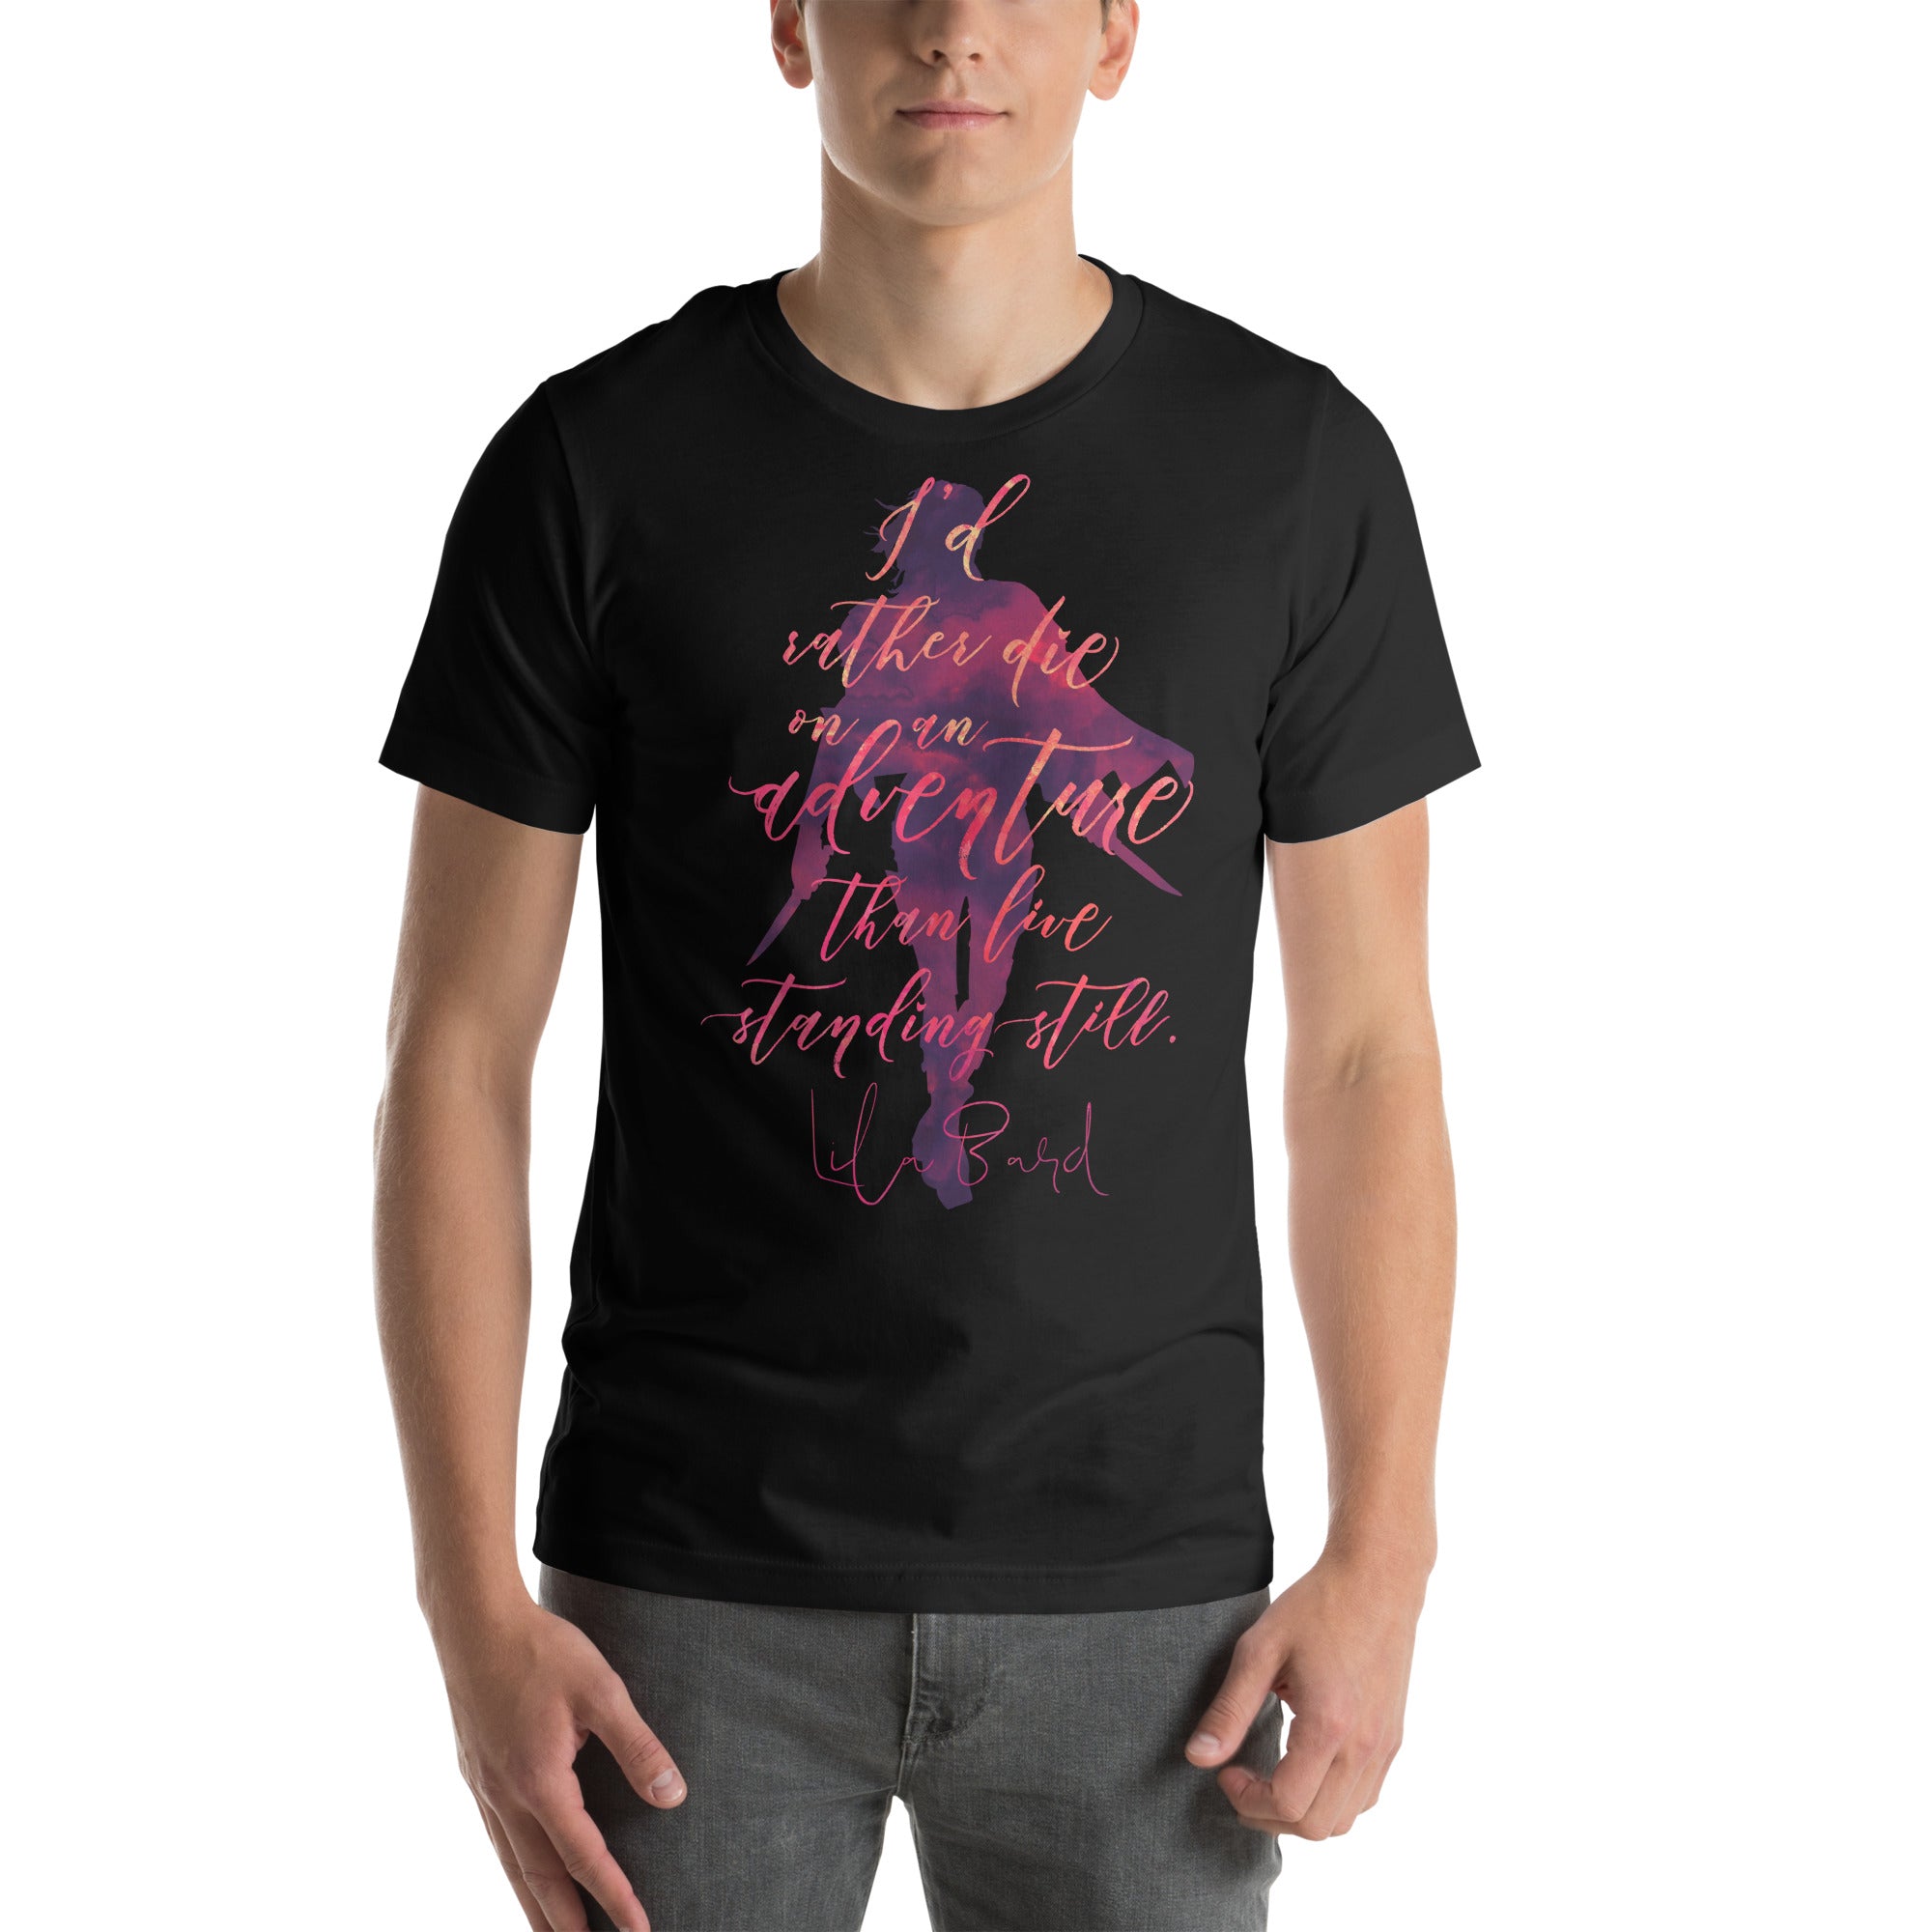 I'd rather die on an adventure... Lila Bard T-Shirt